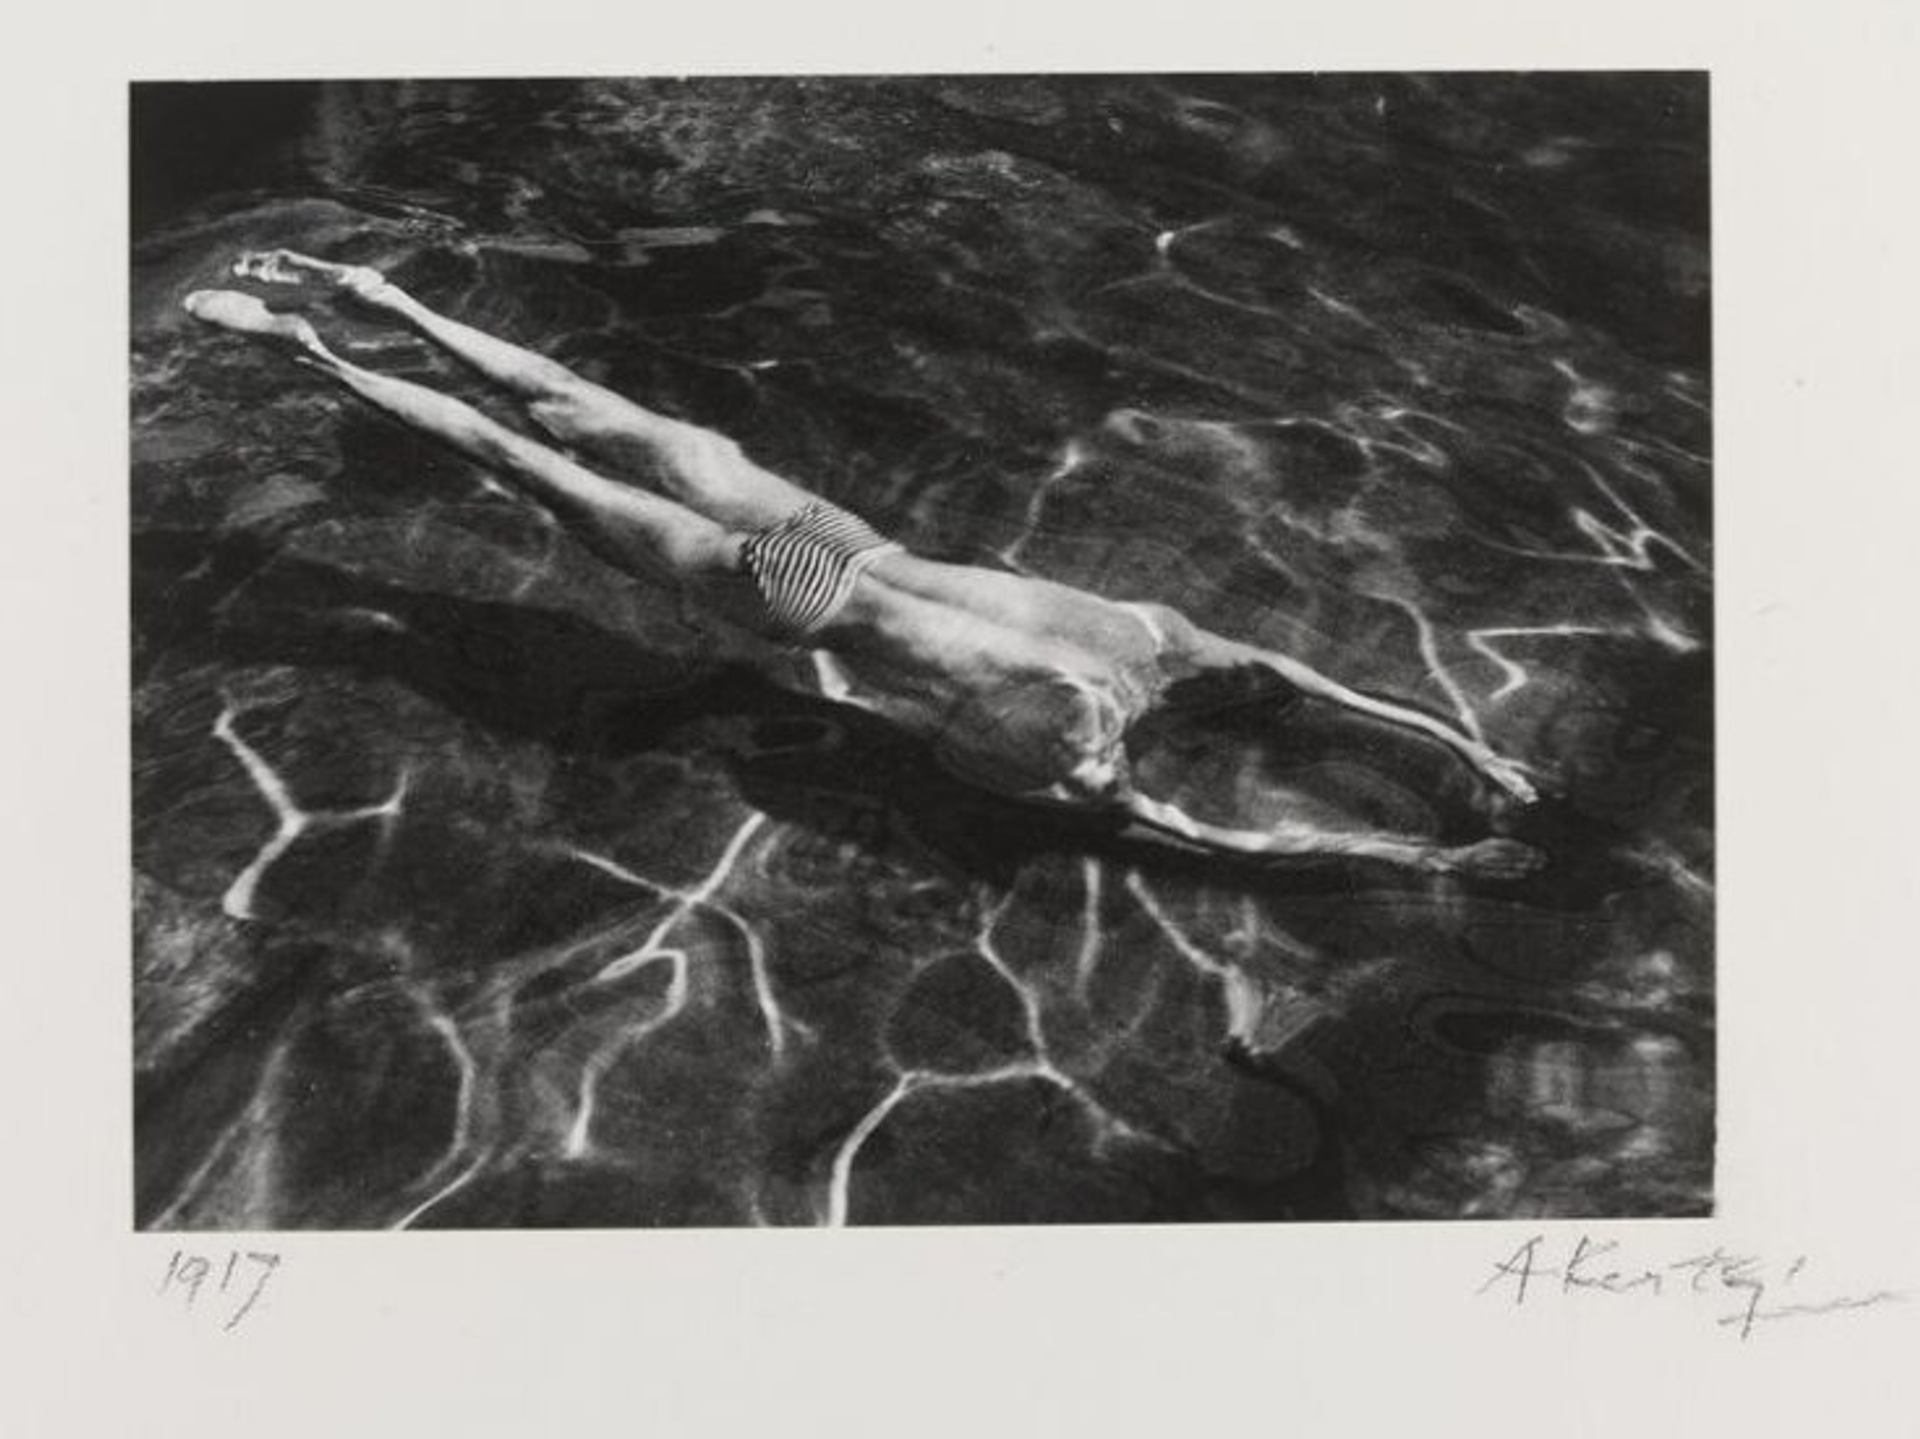 This black and white photograph shows a man swimming underwater.